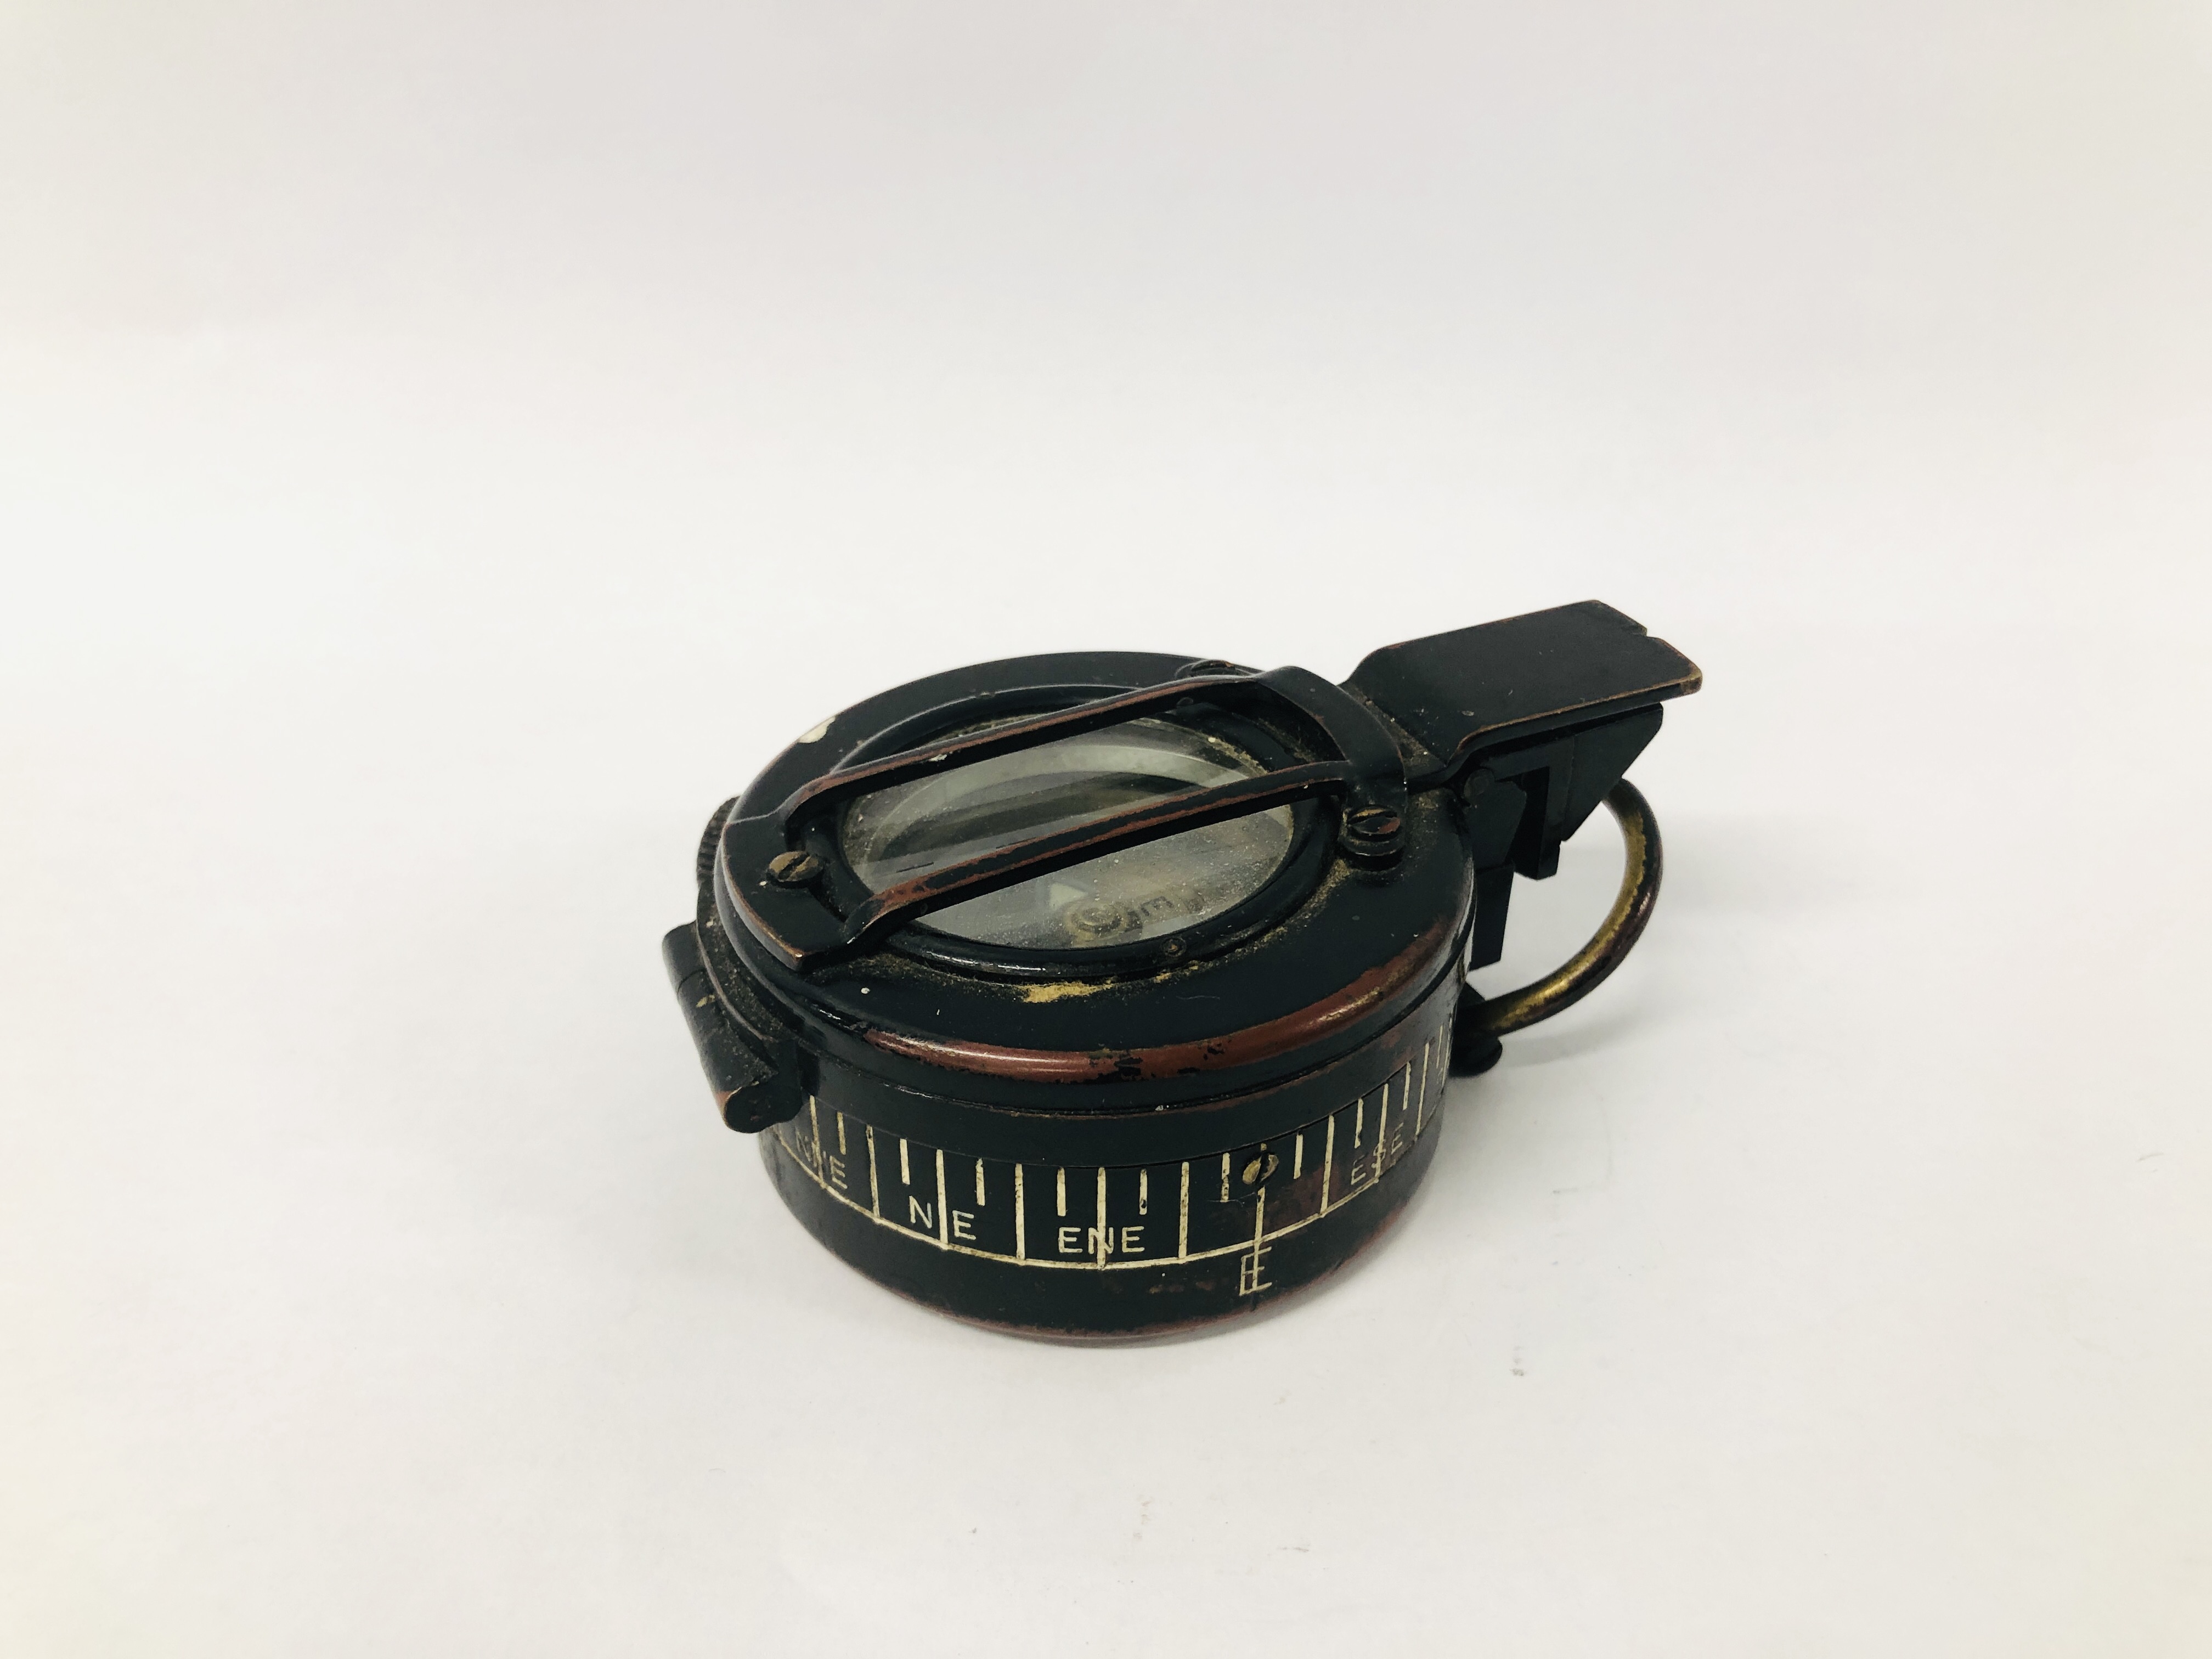 VINTAGE MILITARY COMPASS T.G. CO. LTD. LONDON DATED 1941 NO.